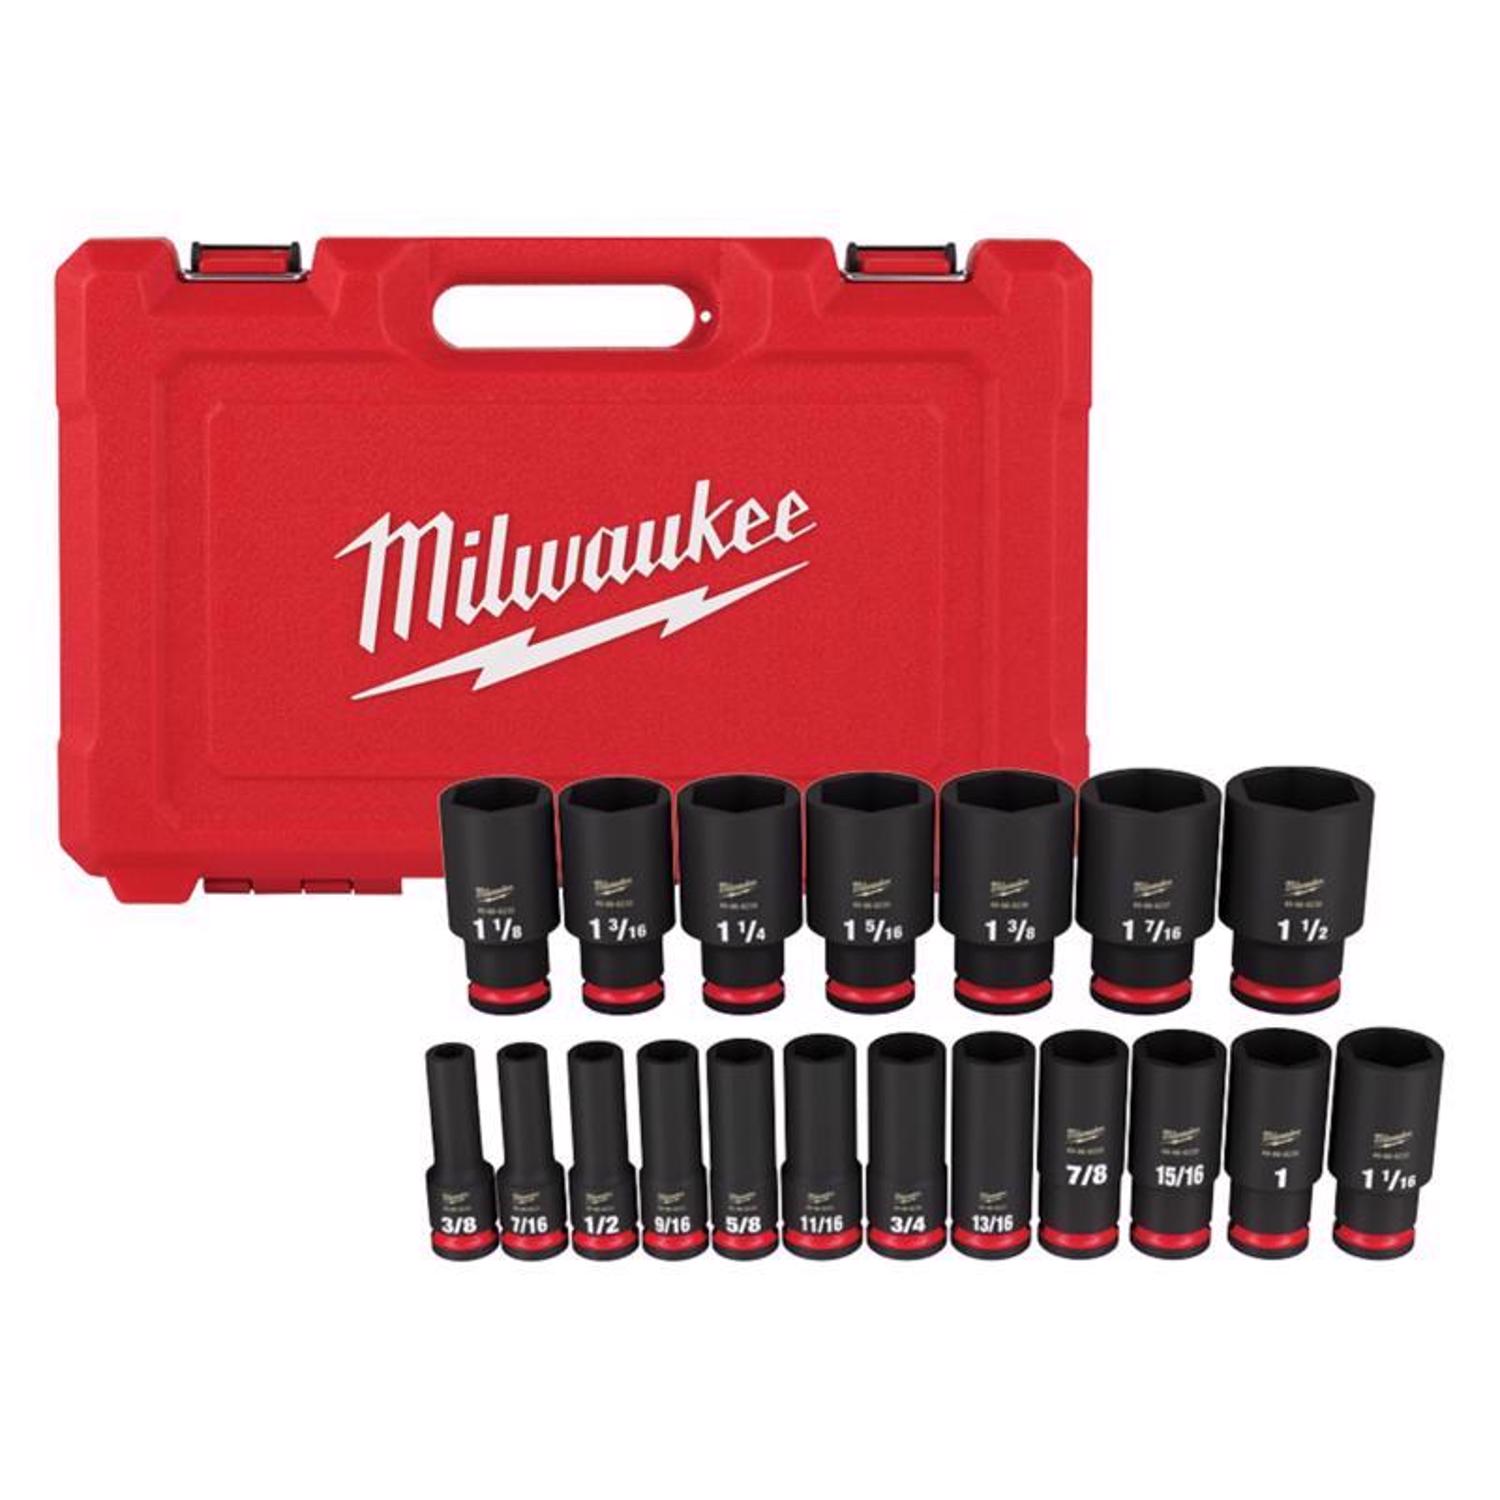 Photos - Tool Box Milwaukee ShockWave 1/2 in. drive SAE 6 Point Deep Impact Rated Socket Set 